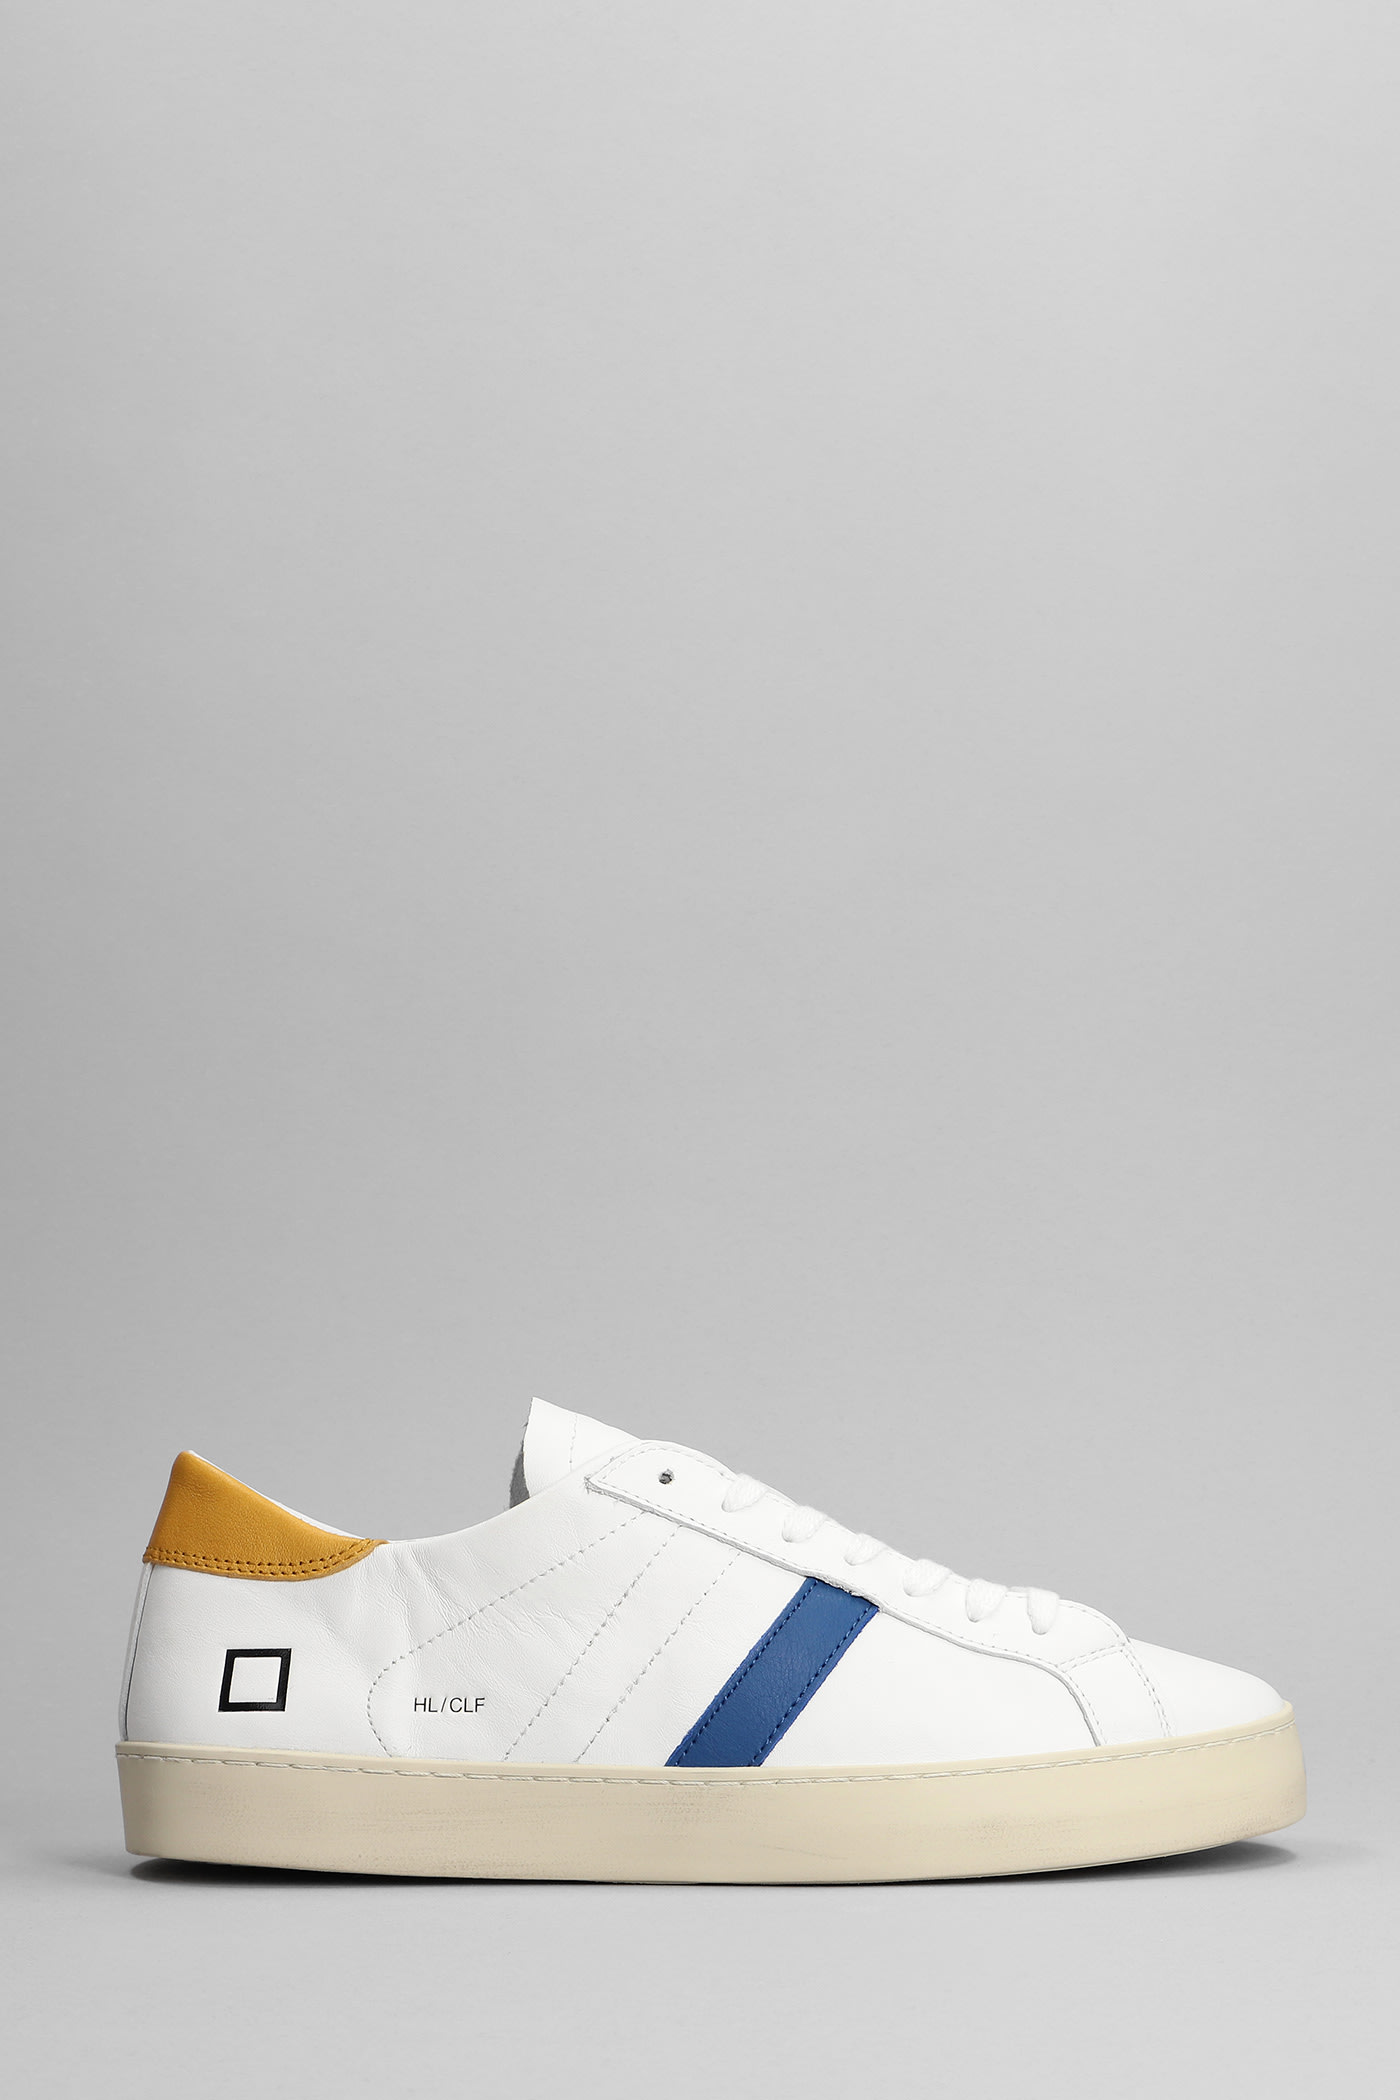 DATE HILL LOW SNEAKERS IN WHITE LEATHER